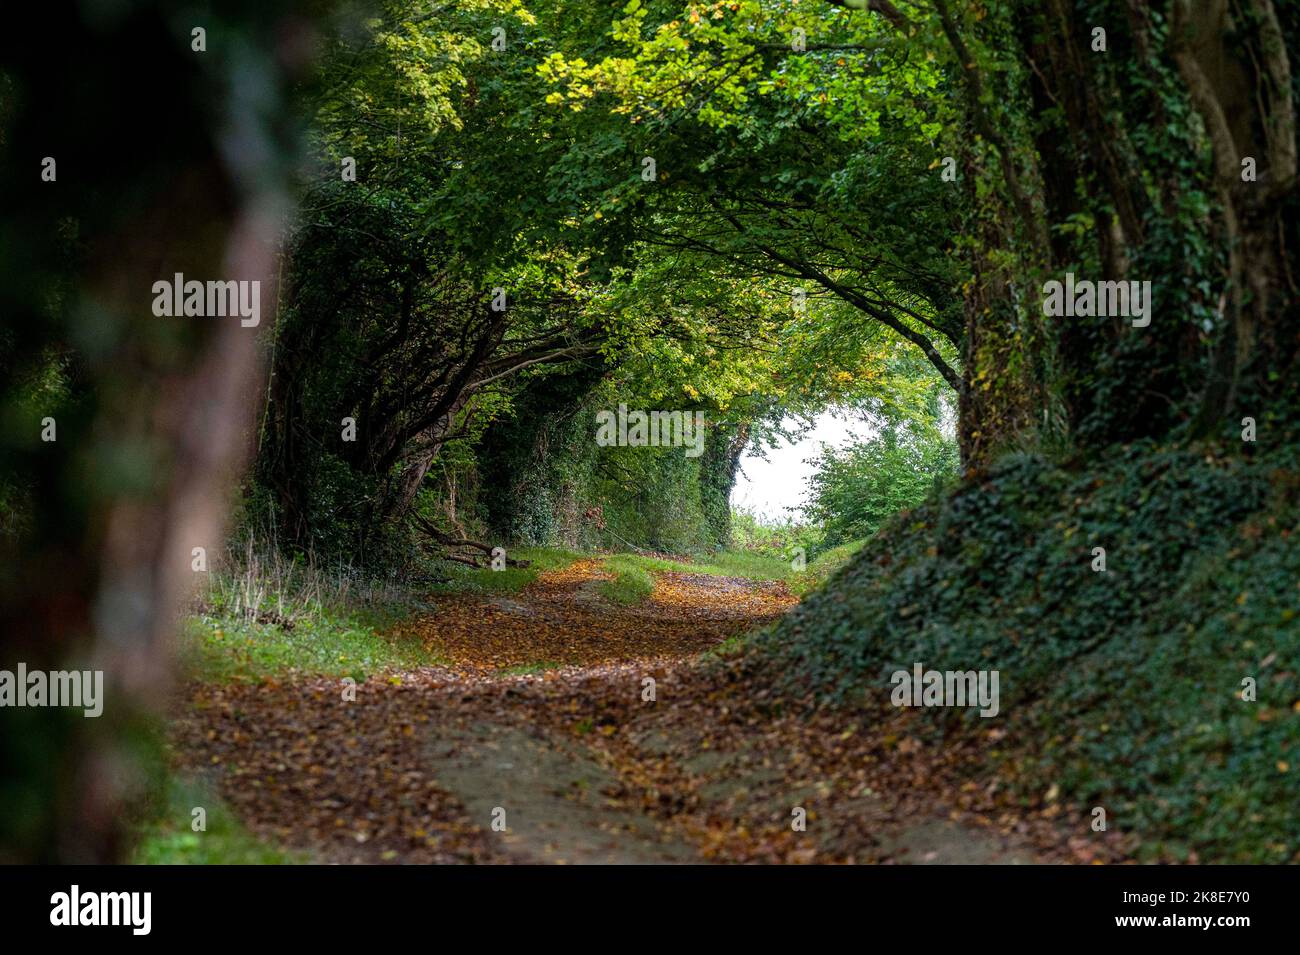 The famous archway of trees on the old Roman Road at Halnaker in Autumn on the South Downs near Chichester West Sussex England UK  Photograph taken by Stock Photo